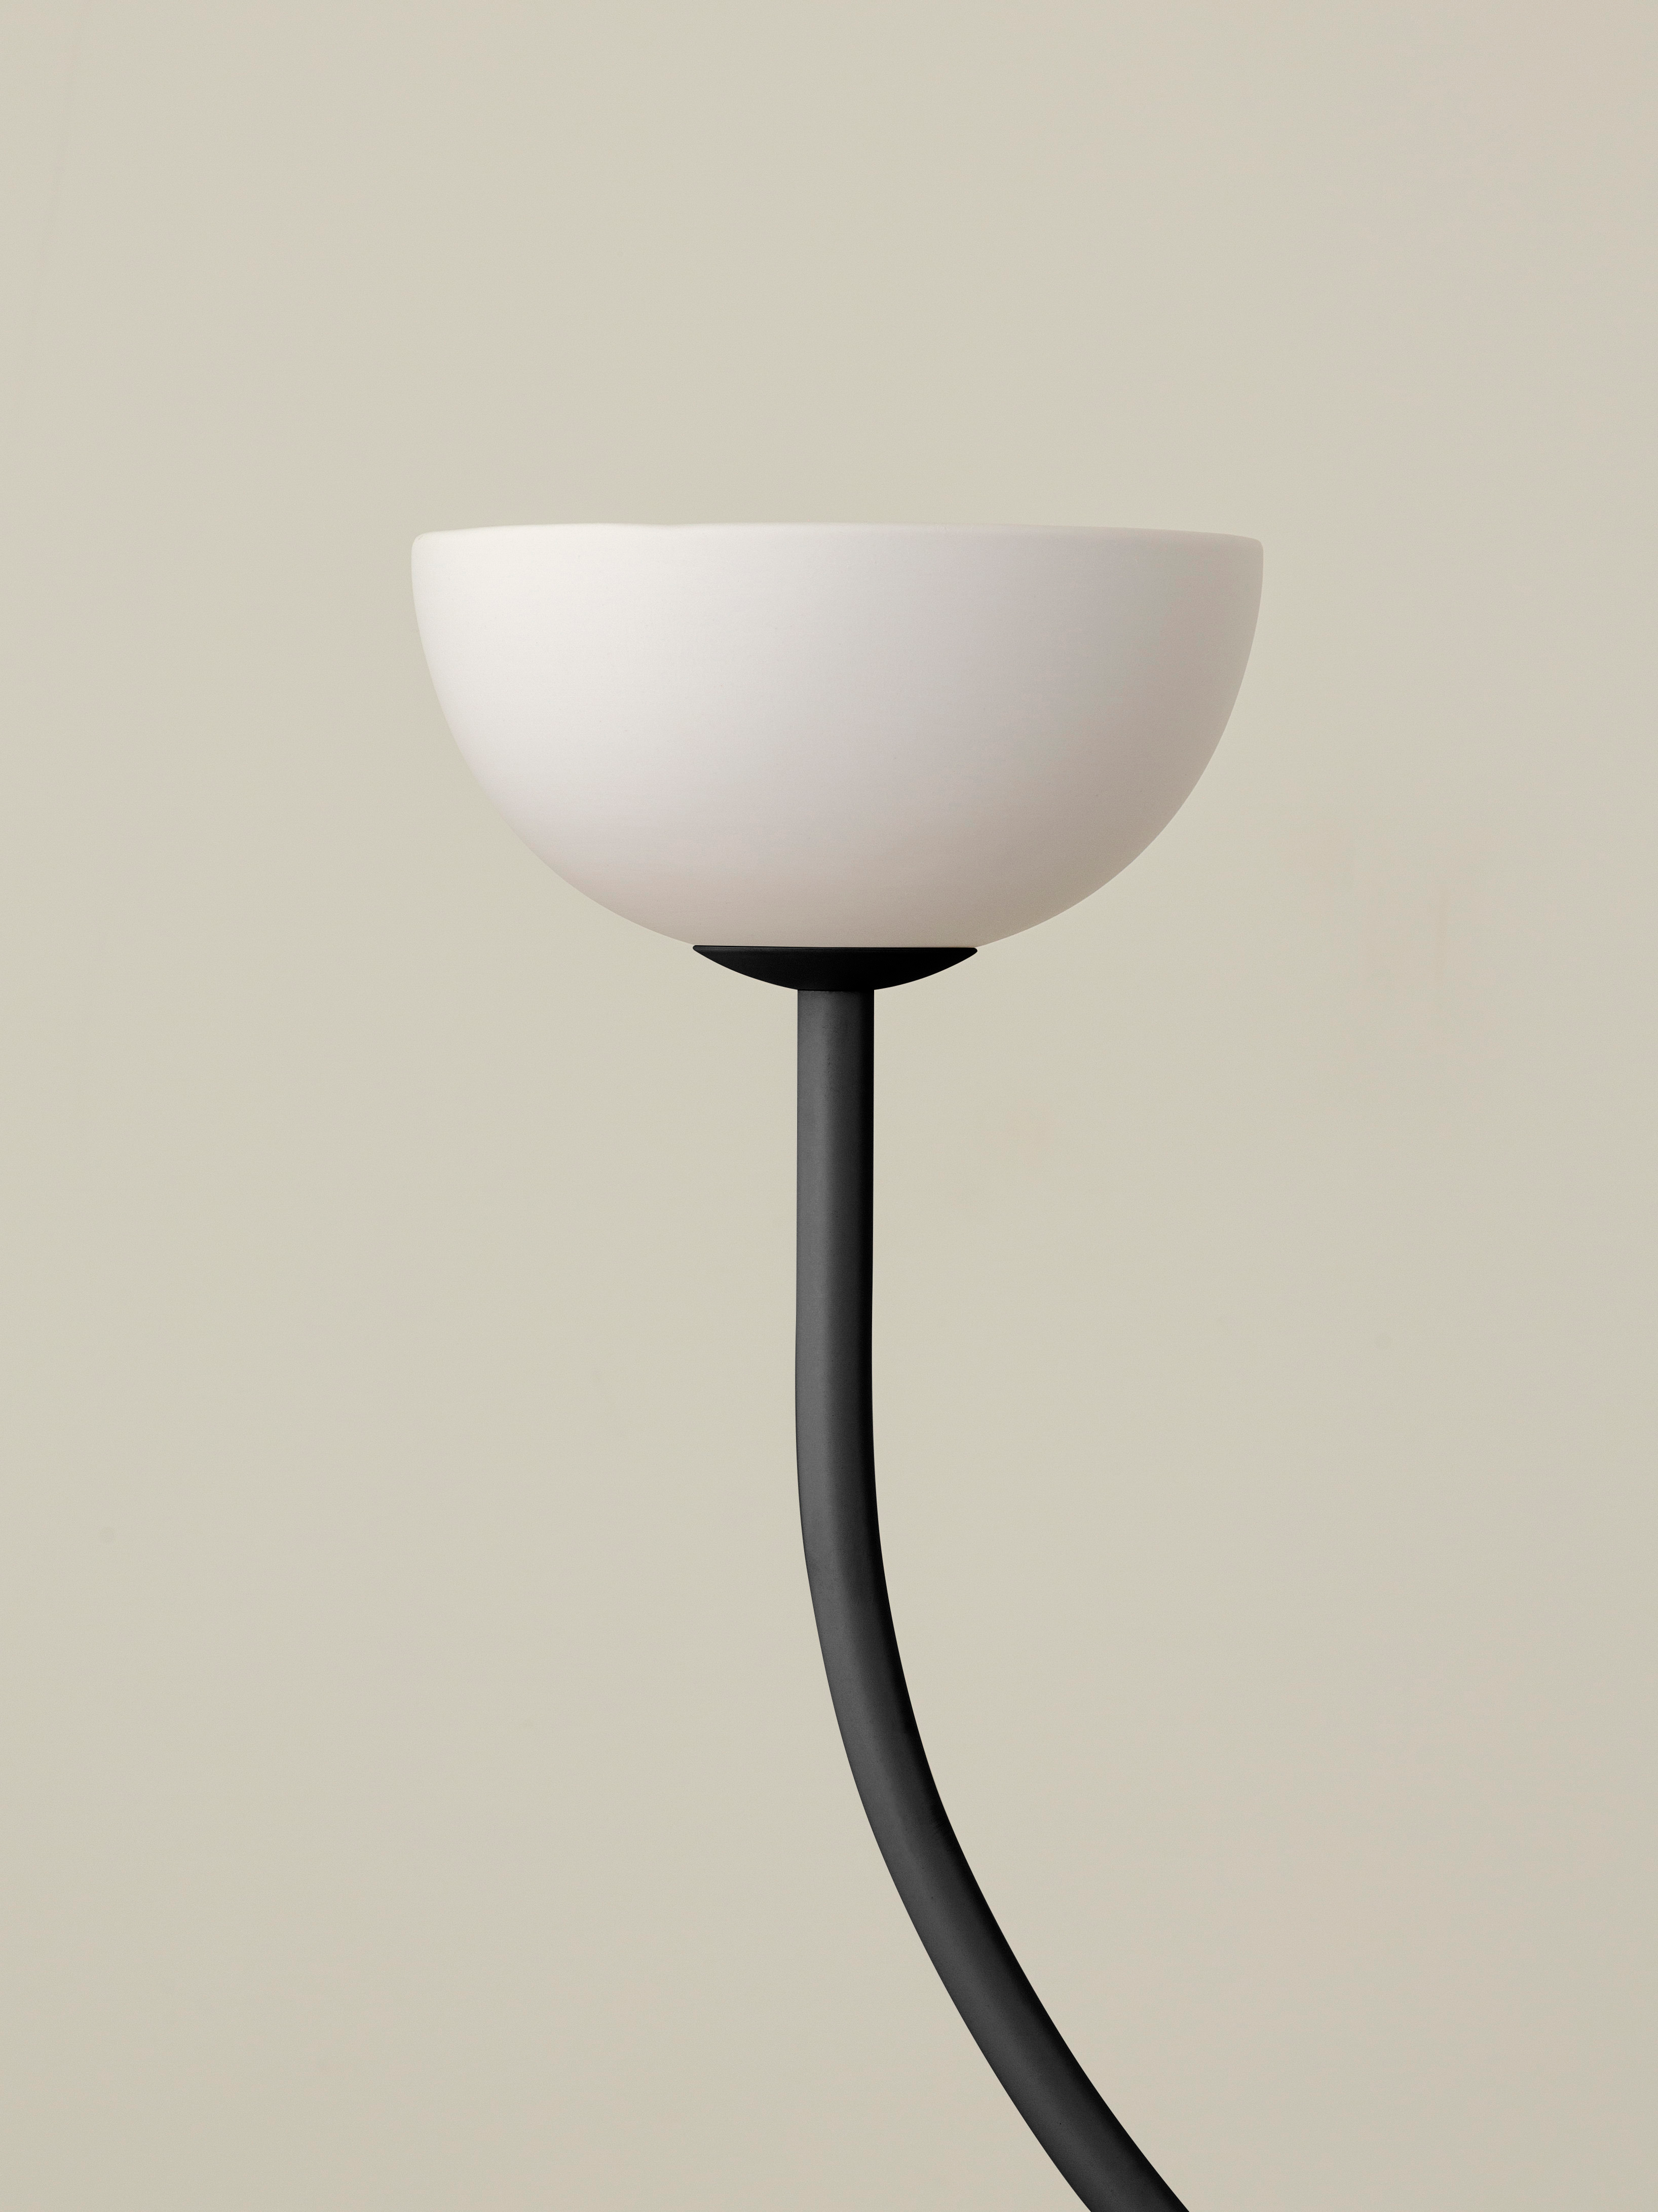 Porcelain lights and lamps collection